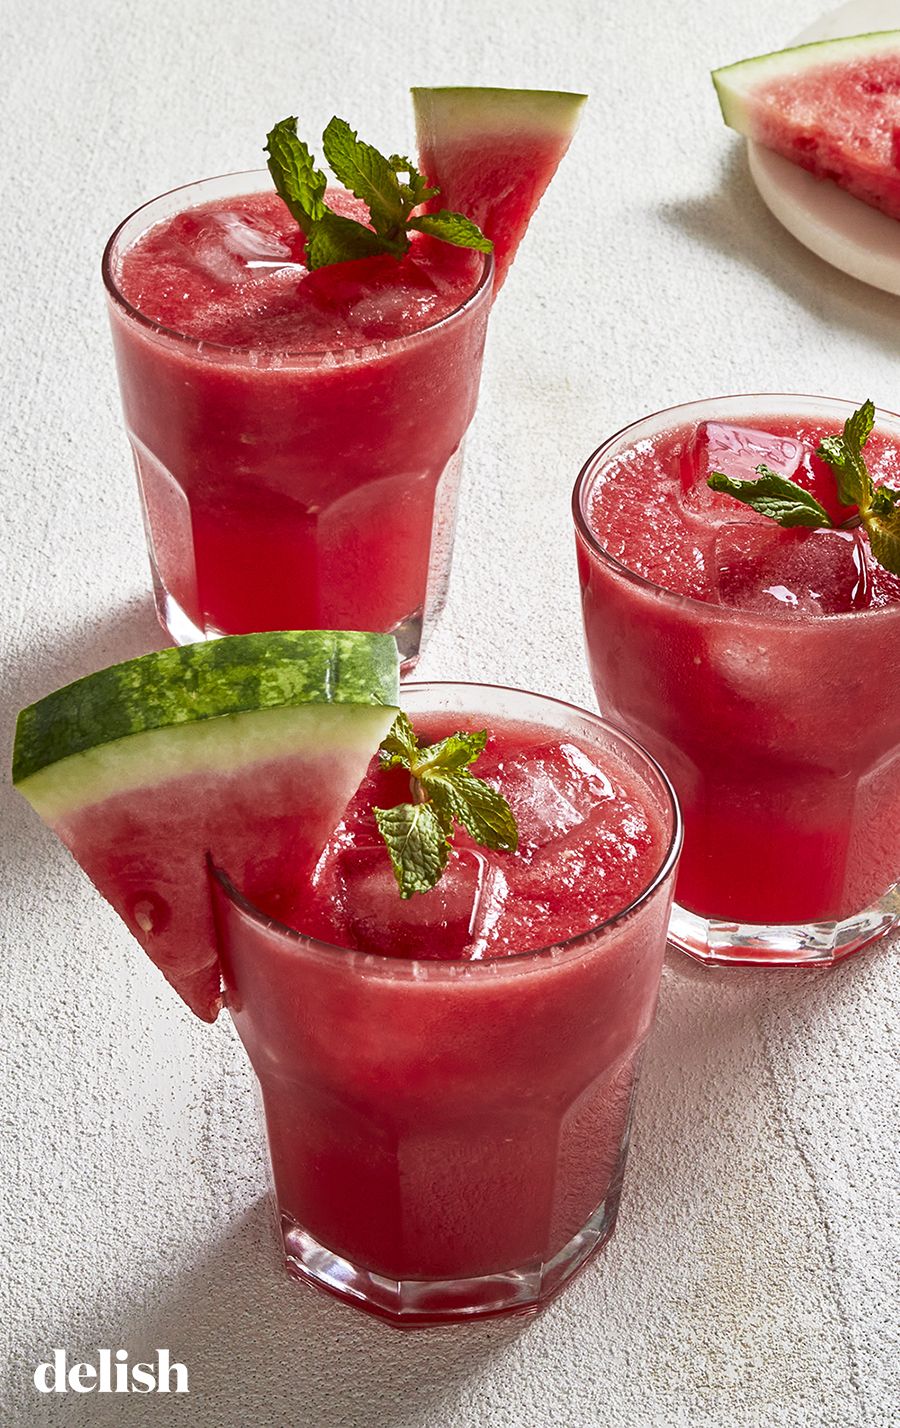 Easy-to-make fruit drinks offer cool way to welcome summertime